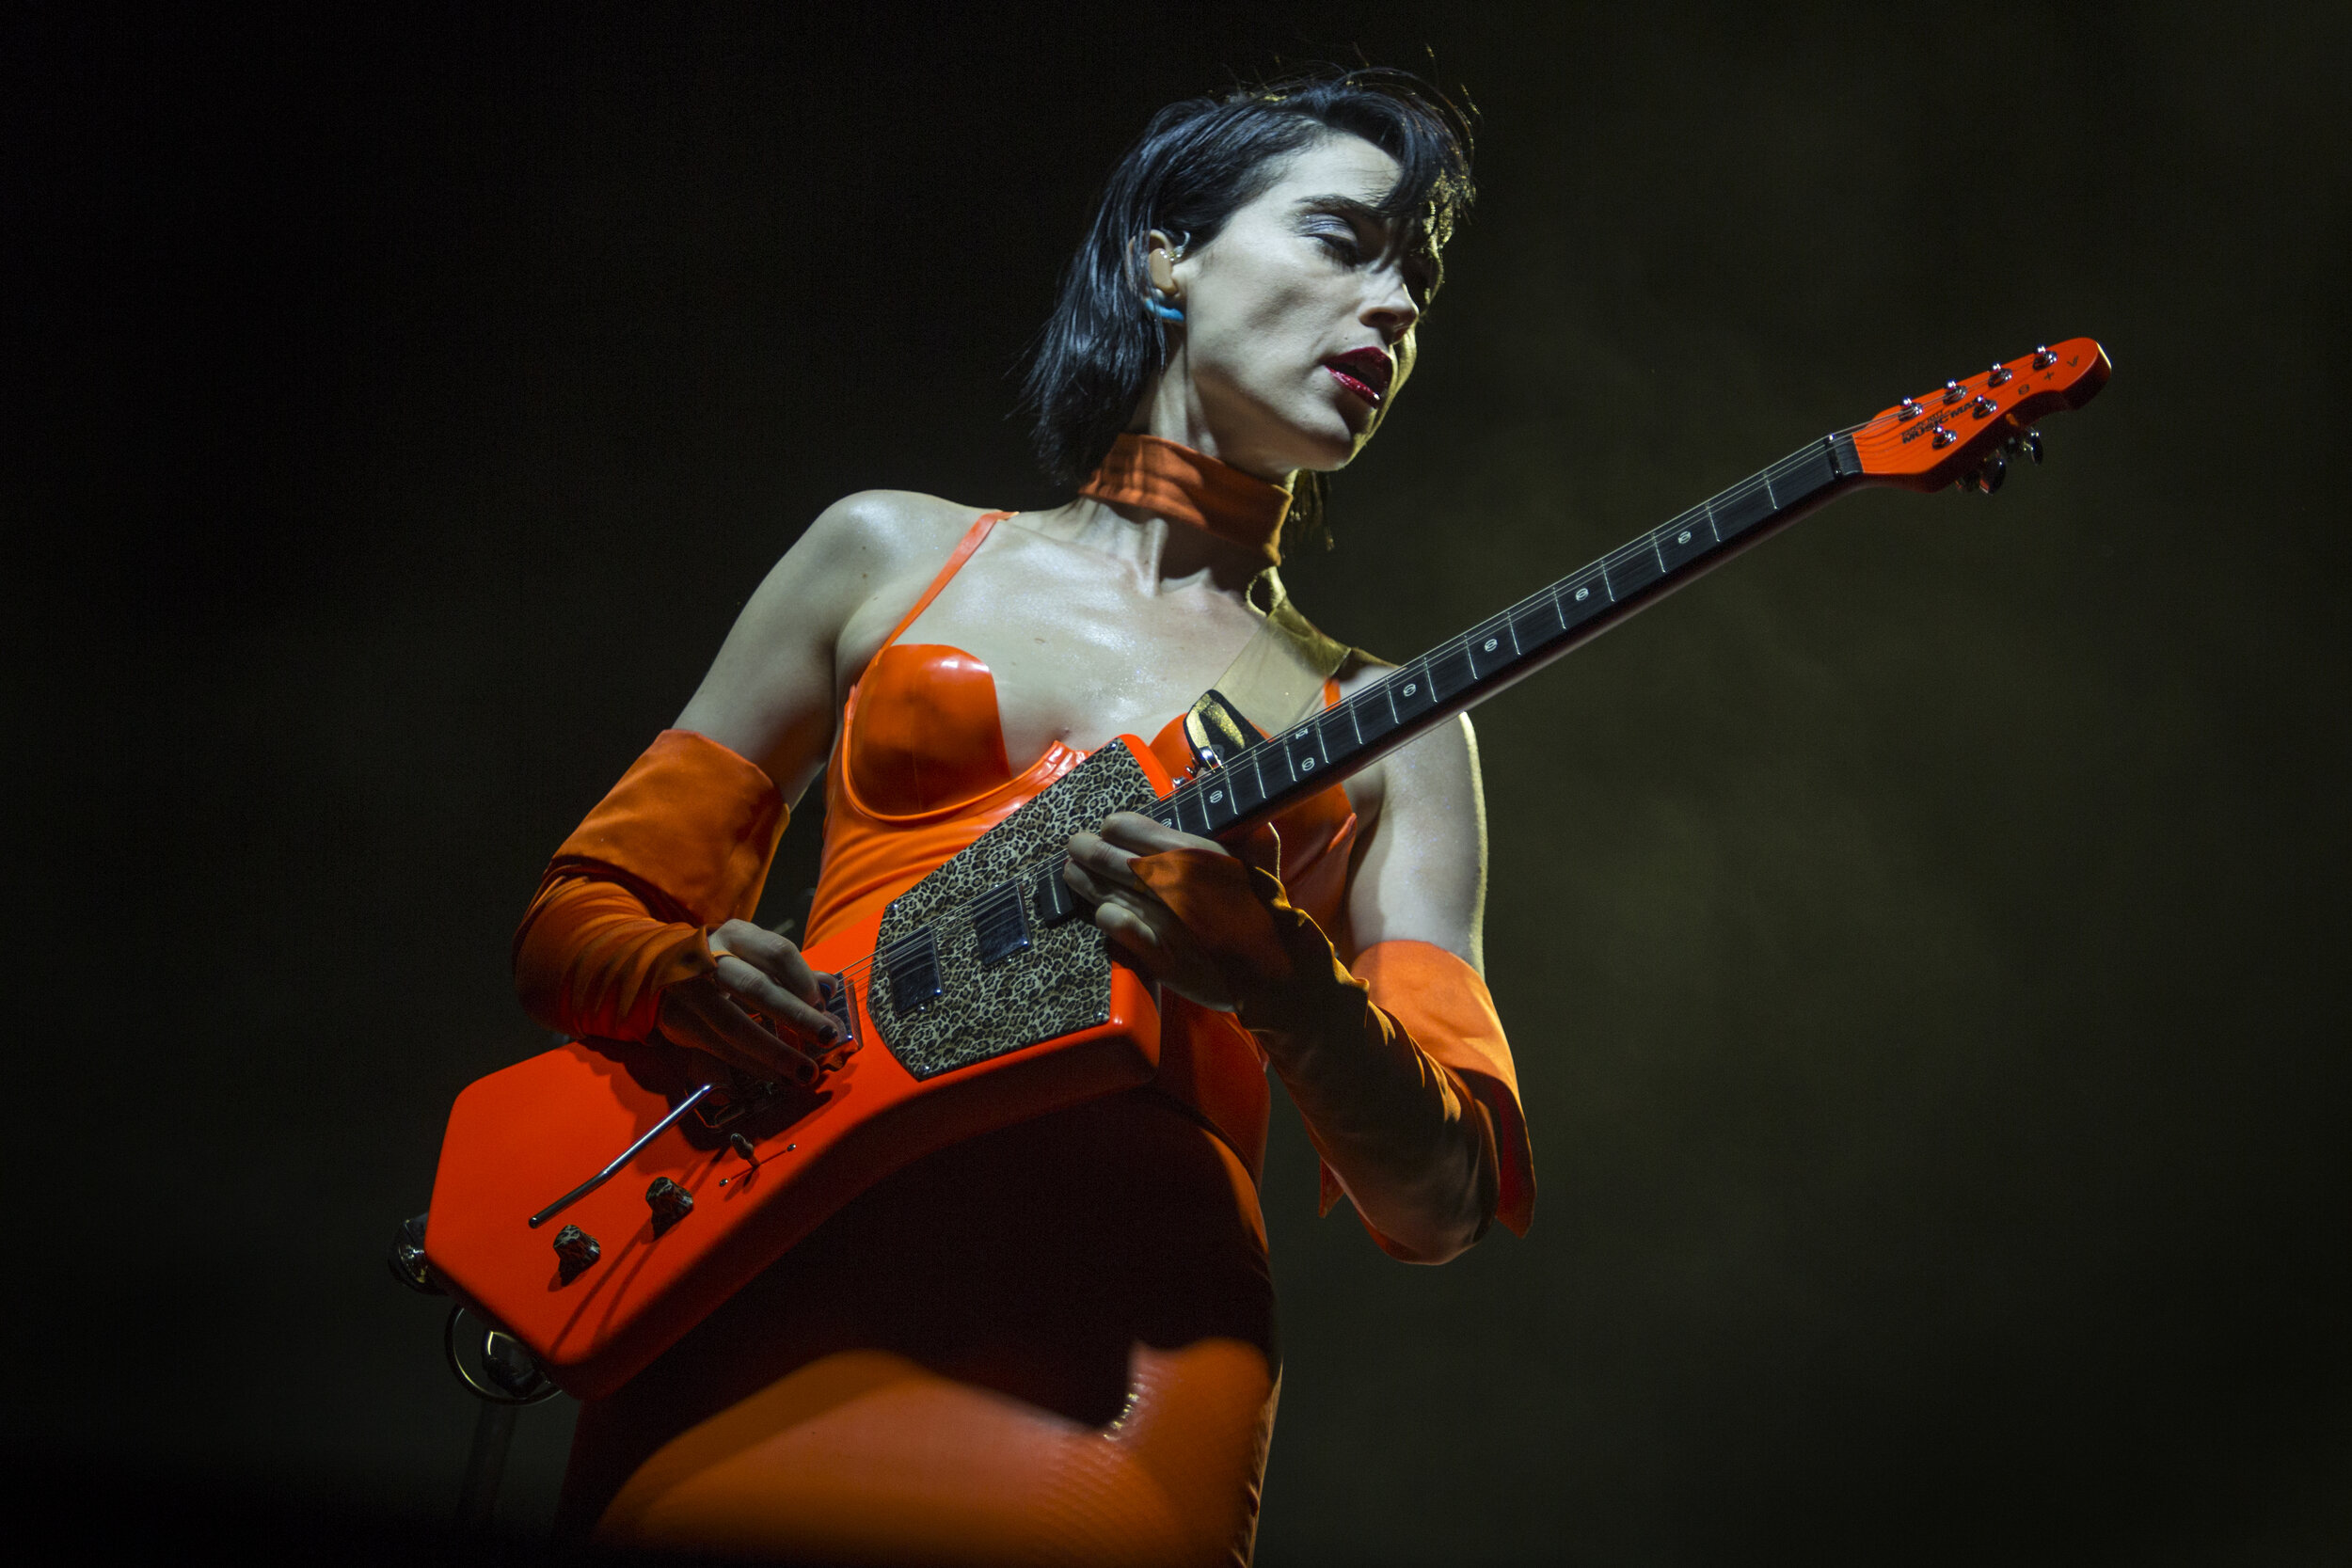  AUSTIN, TX. St. Vincent performs at ACL Music Festival. 